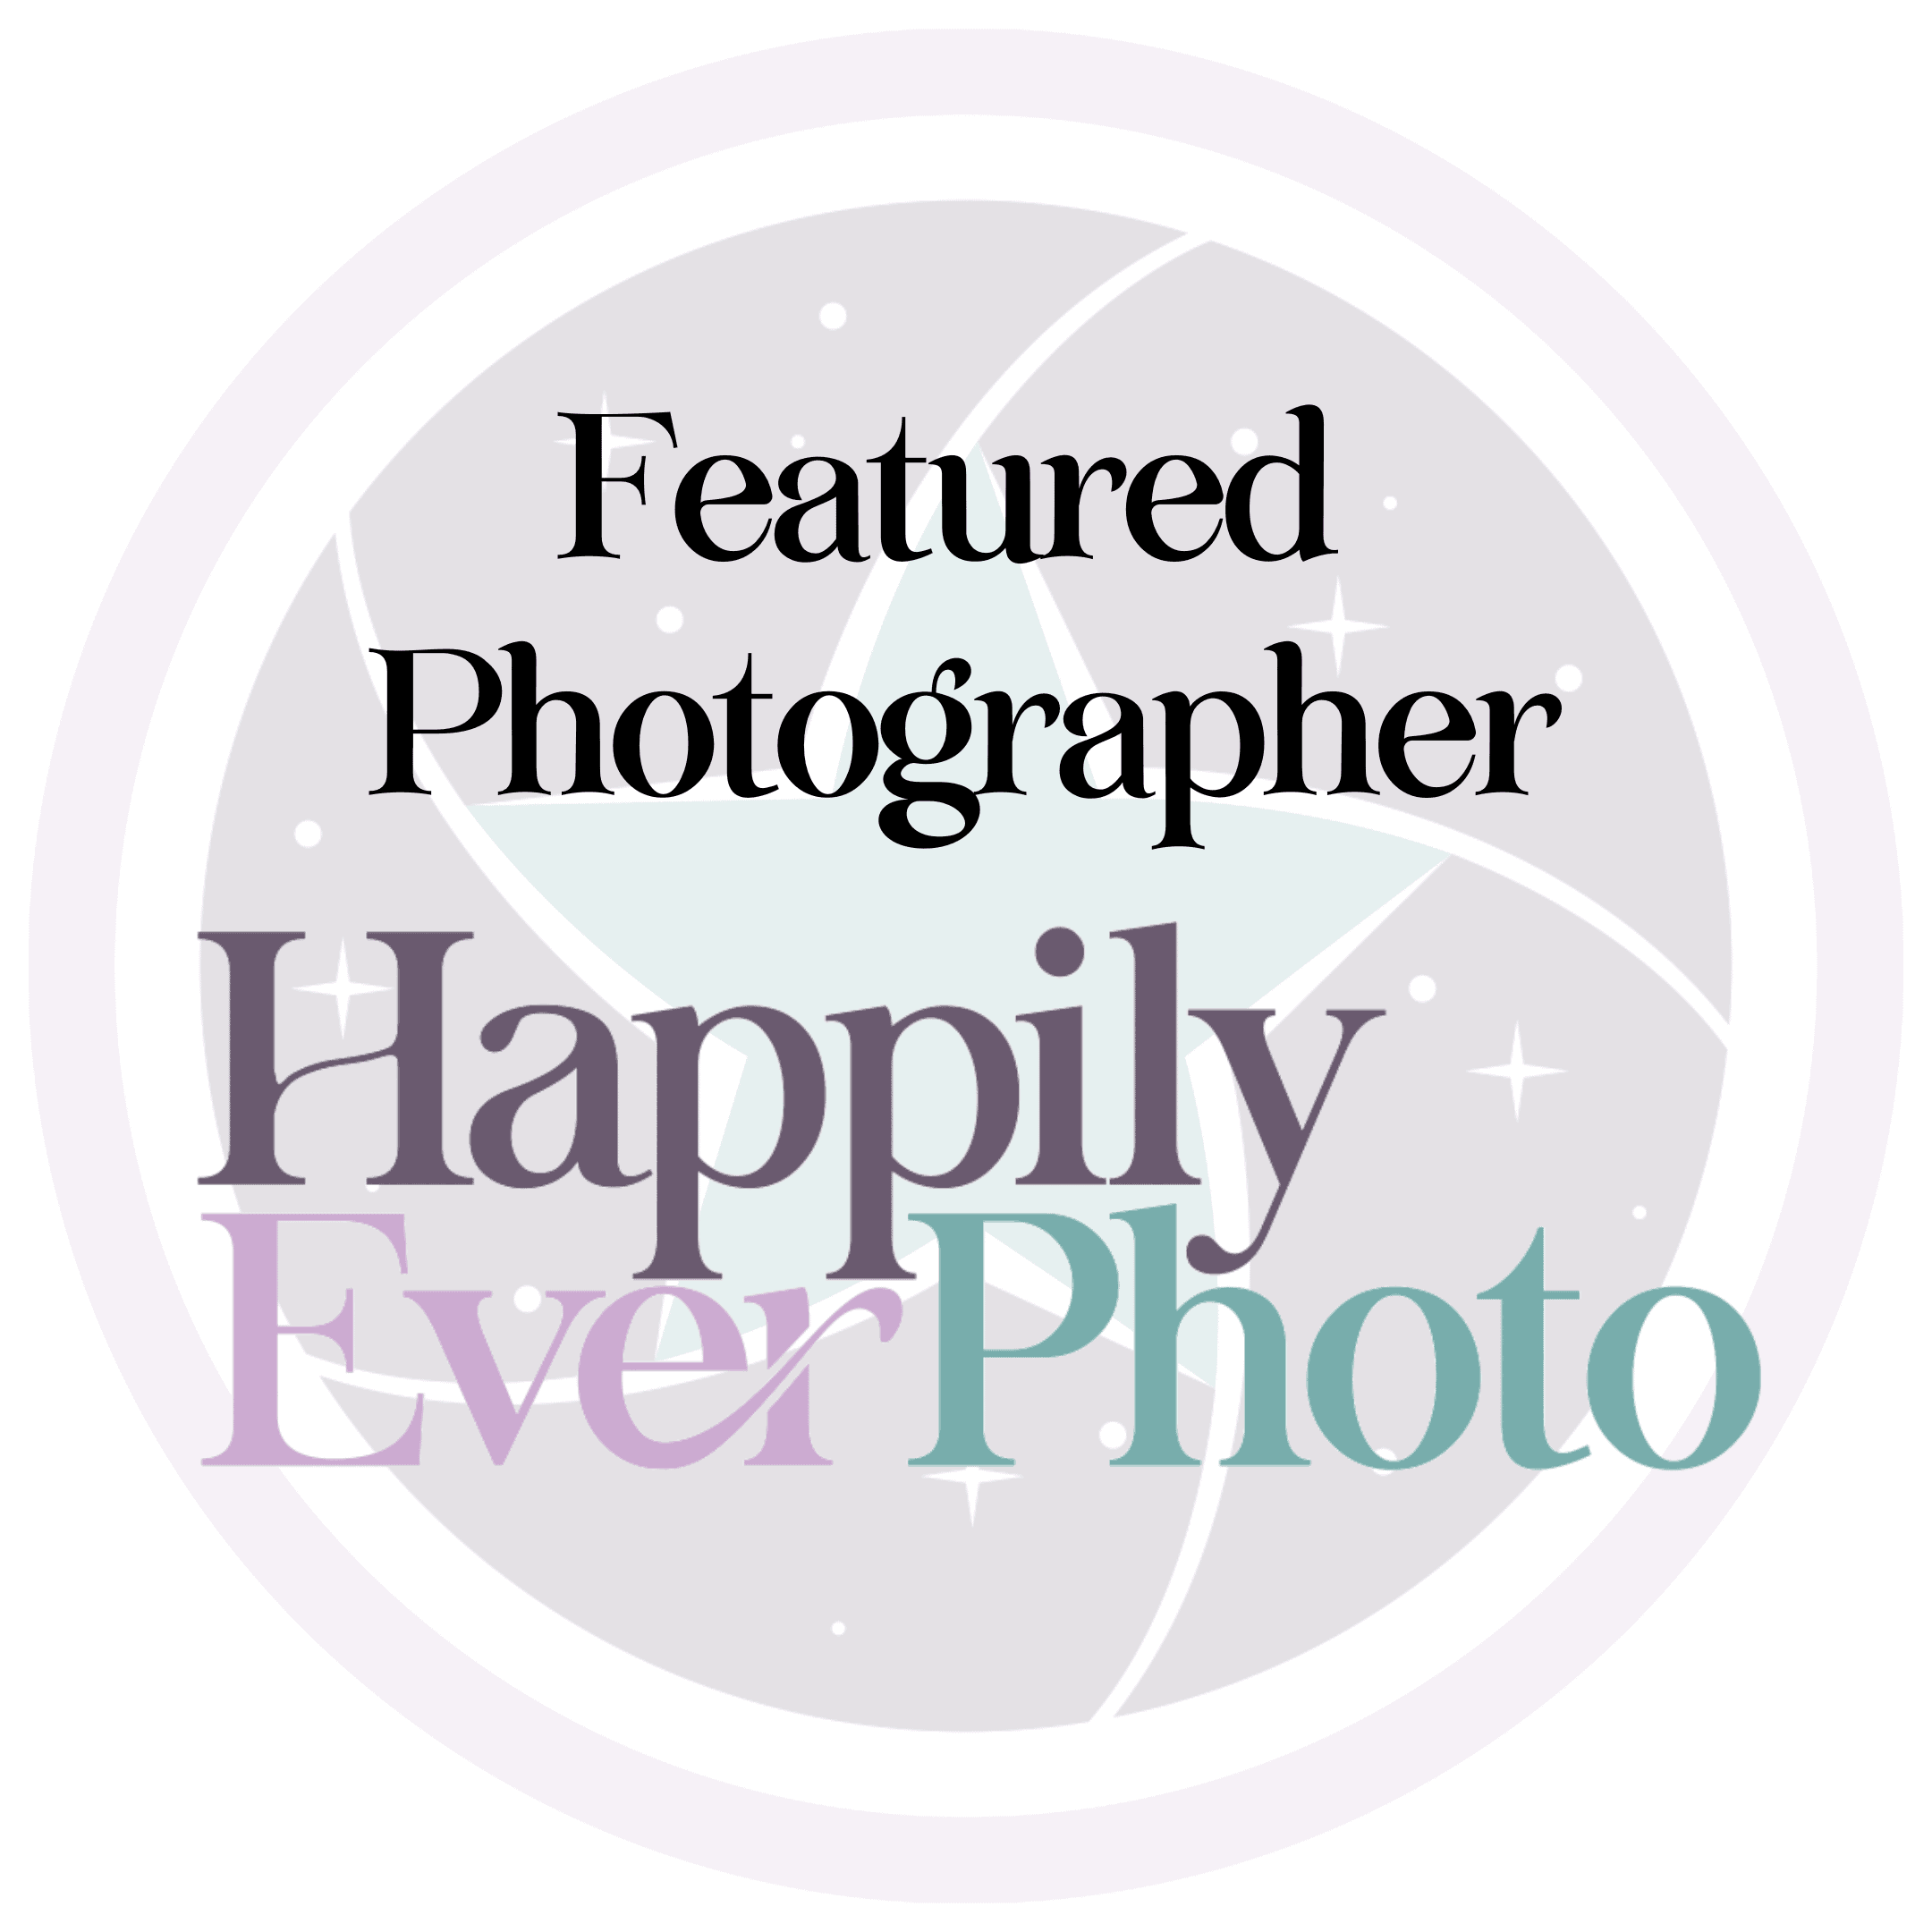 Badge from Happily Ever Photo for featured photographer